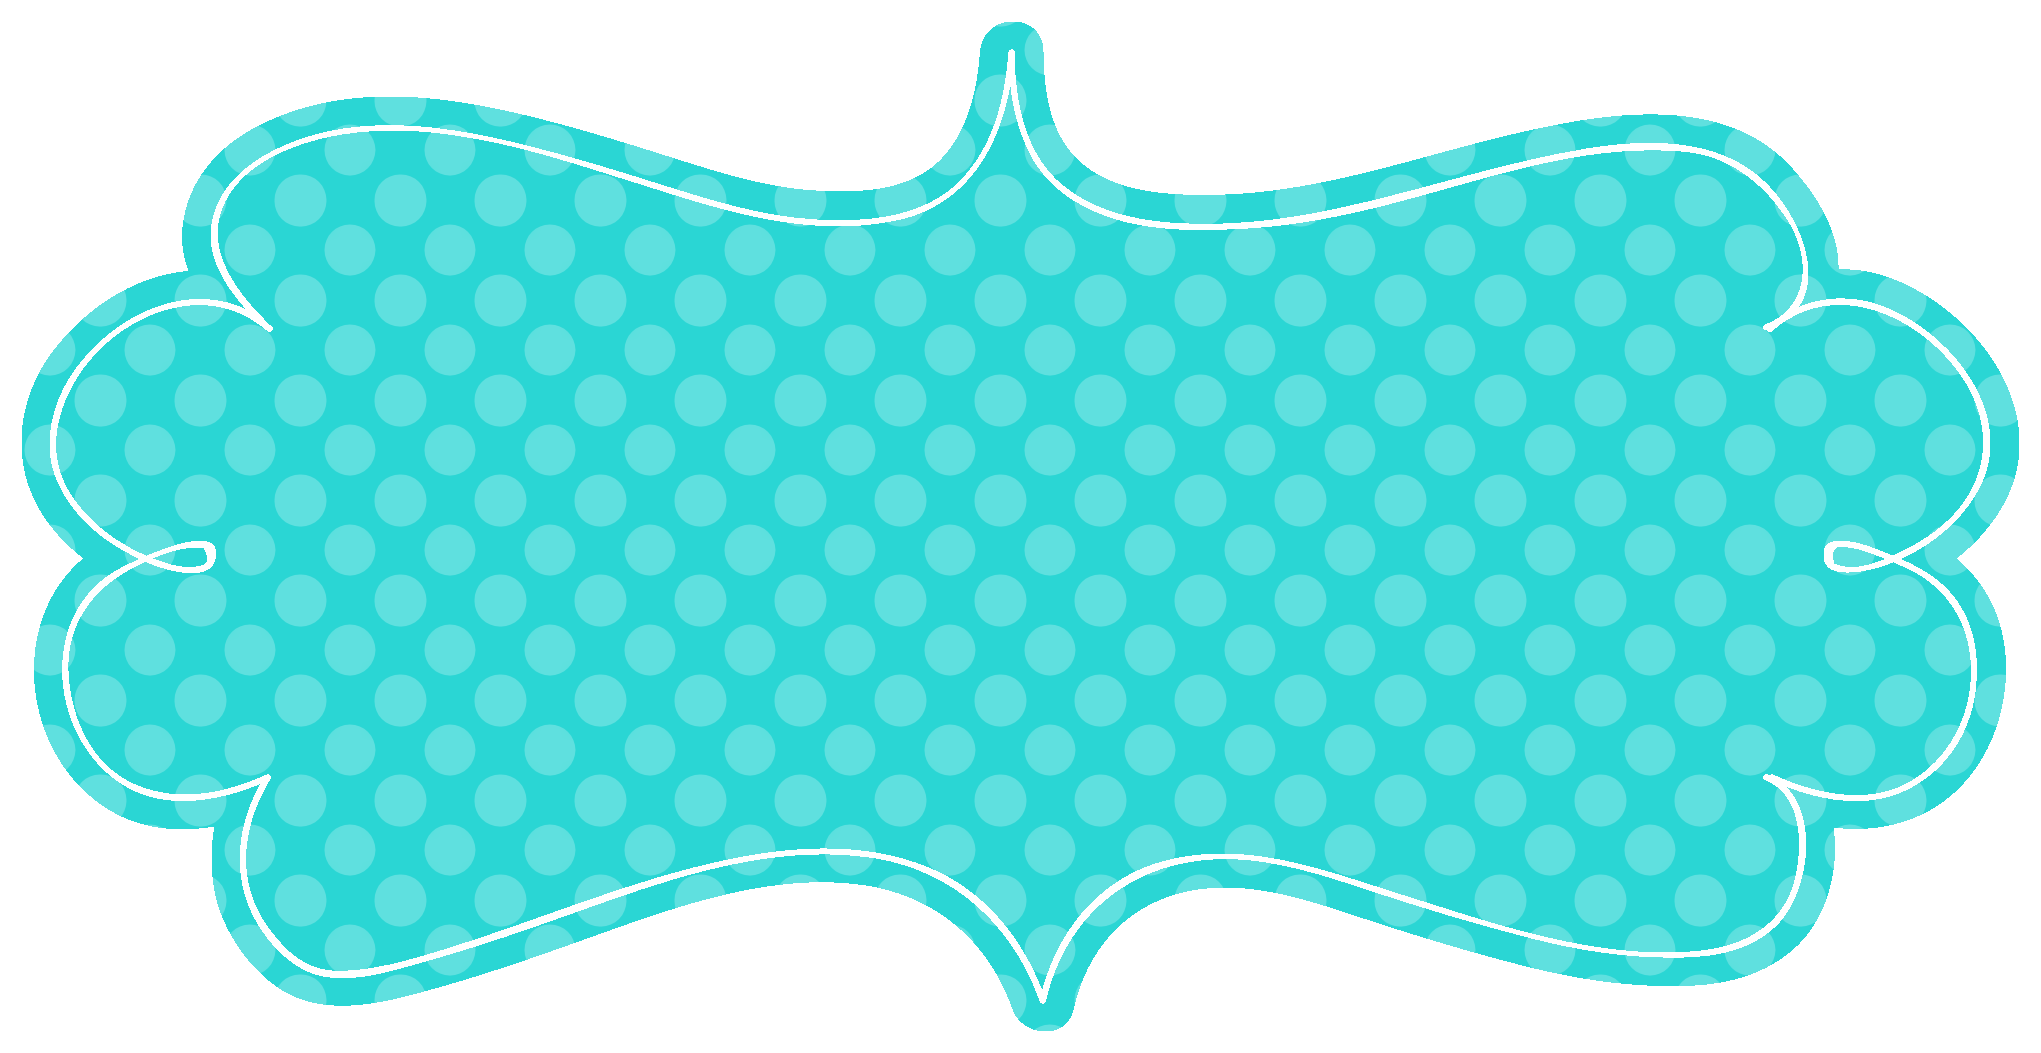 Igio rg zovyf png. Label clipart turquoise